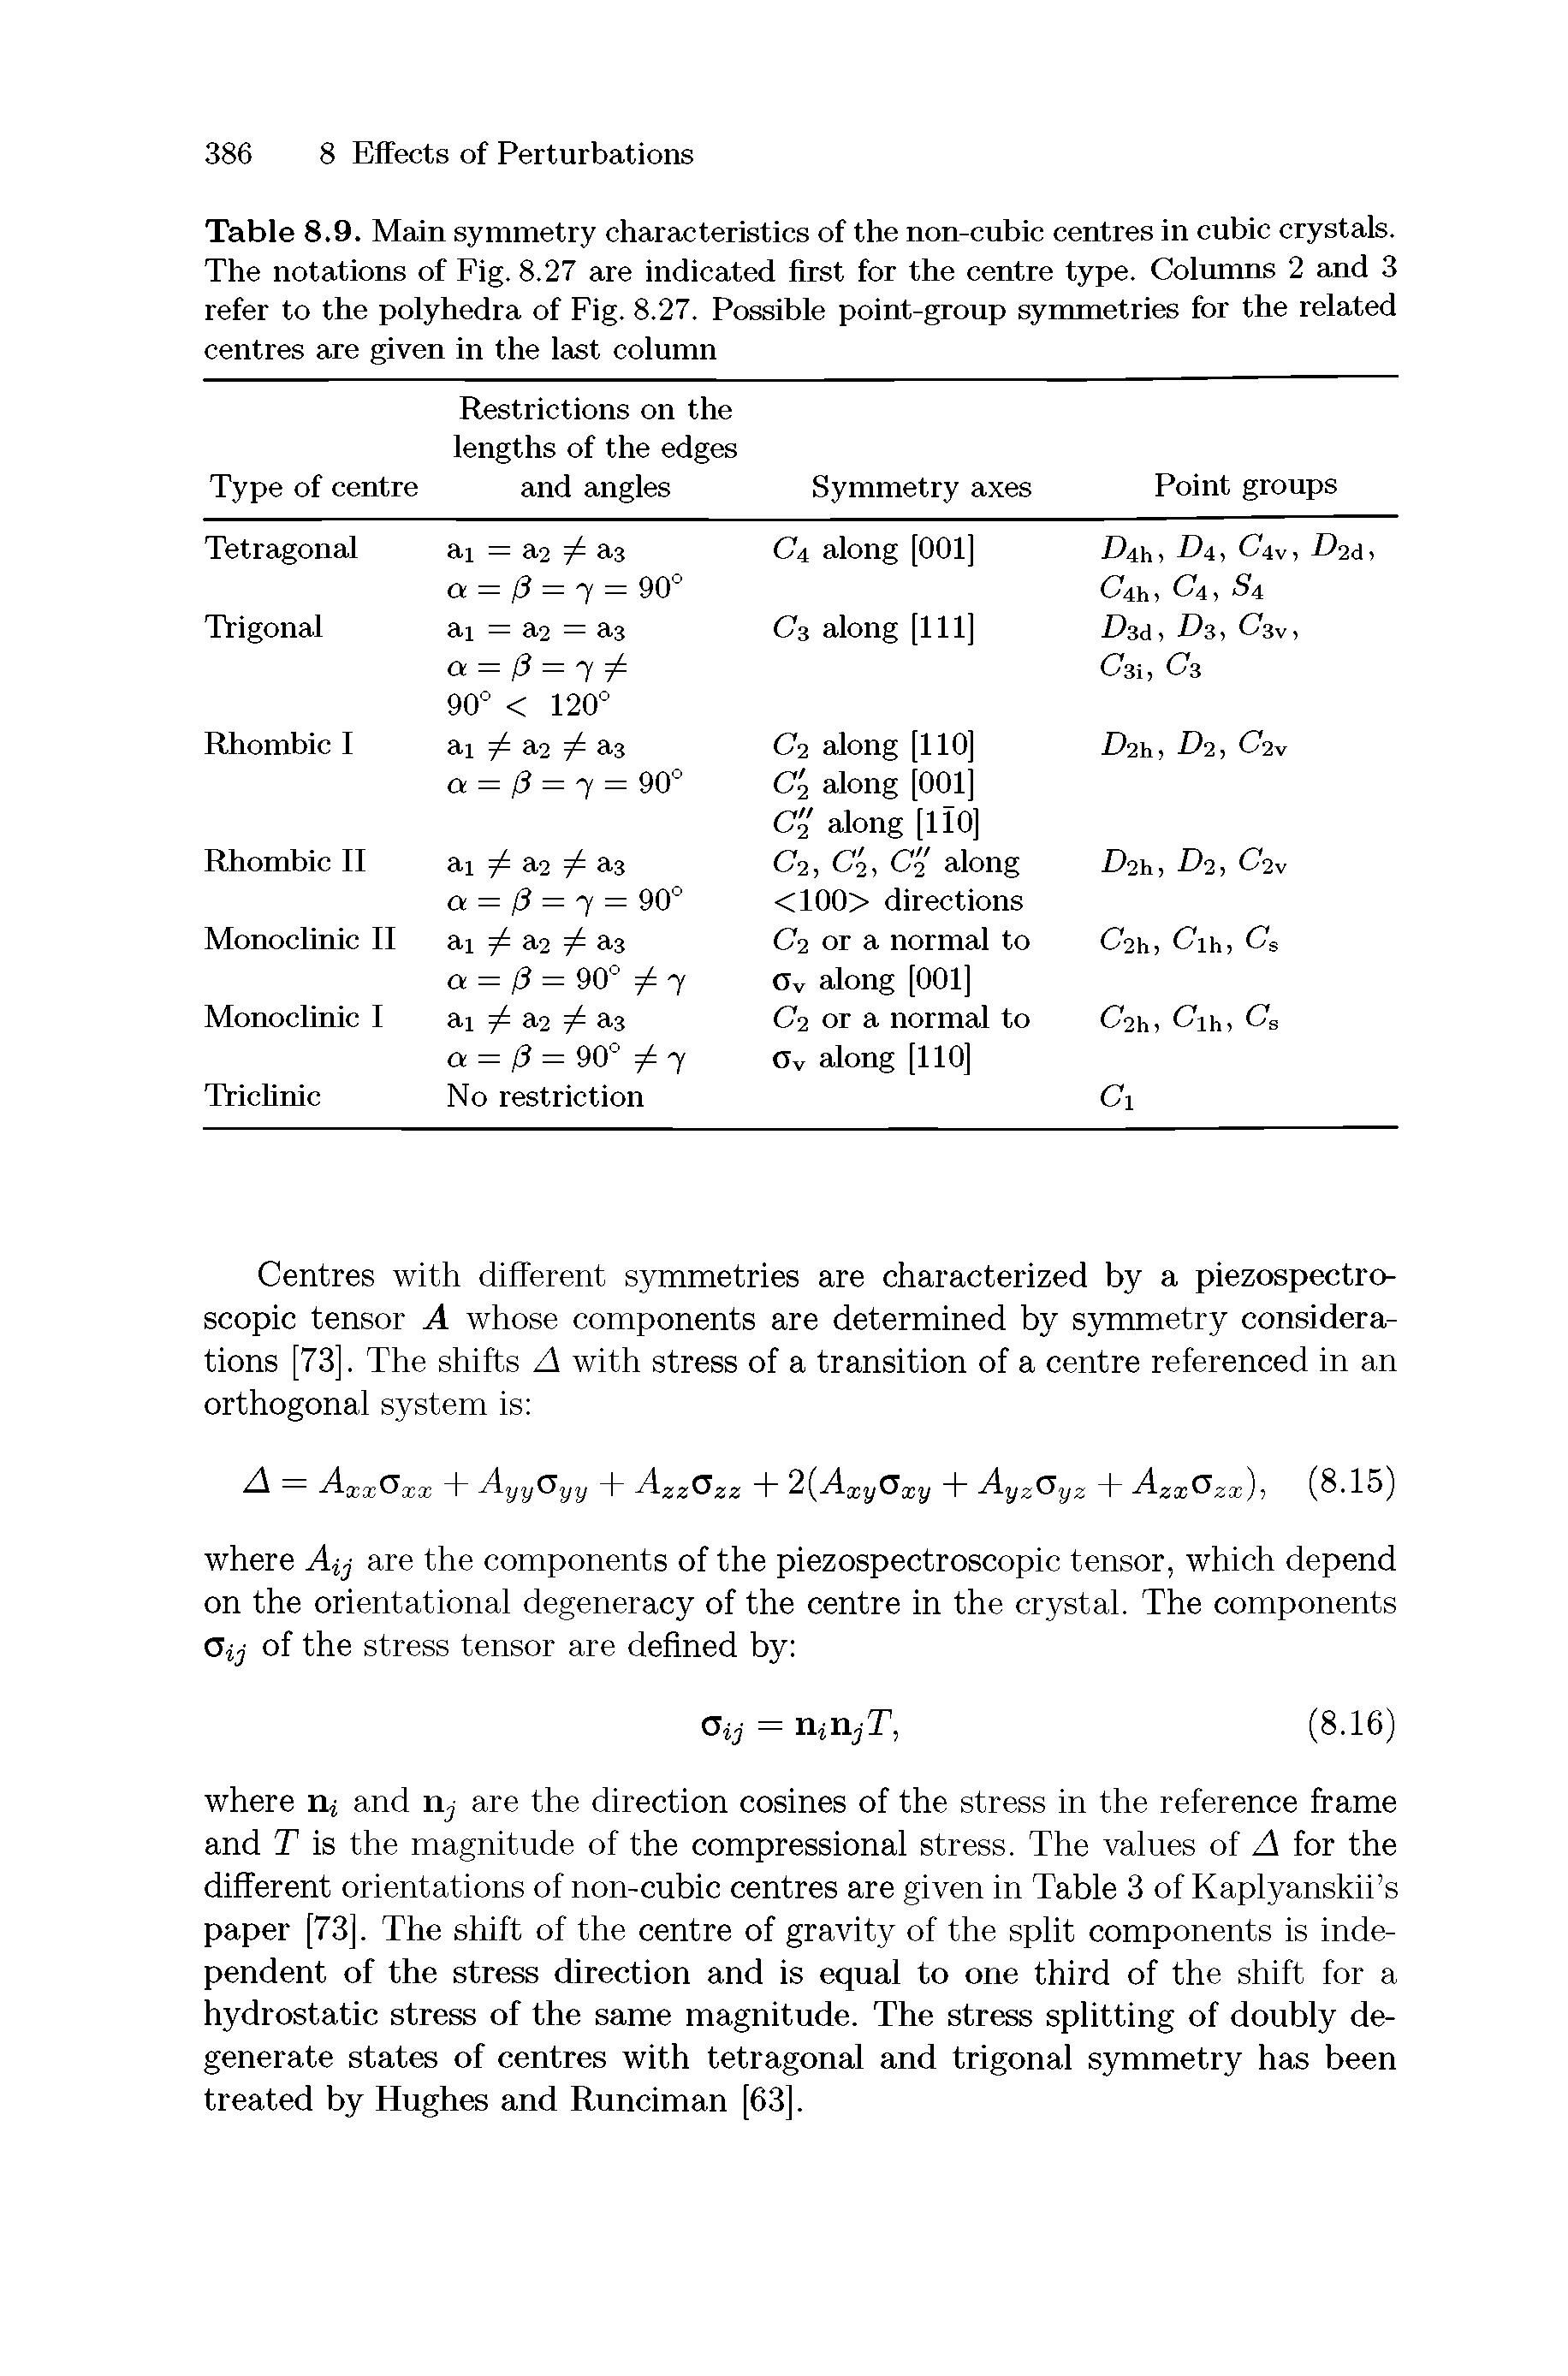 Table 8.9. Main symmetry characteristics of the non-cubic centres in cubic crystals. The notations of Fig. 8.27 are indicated first for the centre type. Columns 2 and 3 refer to the polyhedra of Fig. 8.27. Possible point-group symmetries for the related centres are given in the last column...